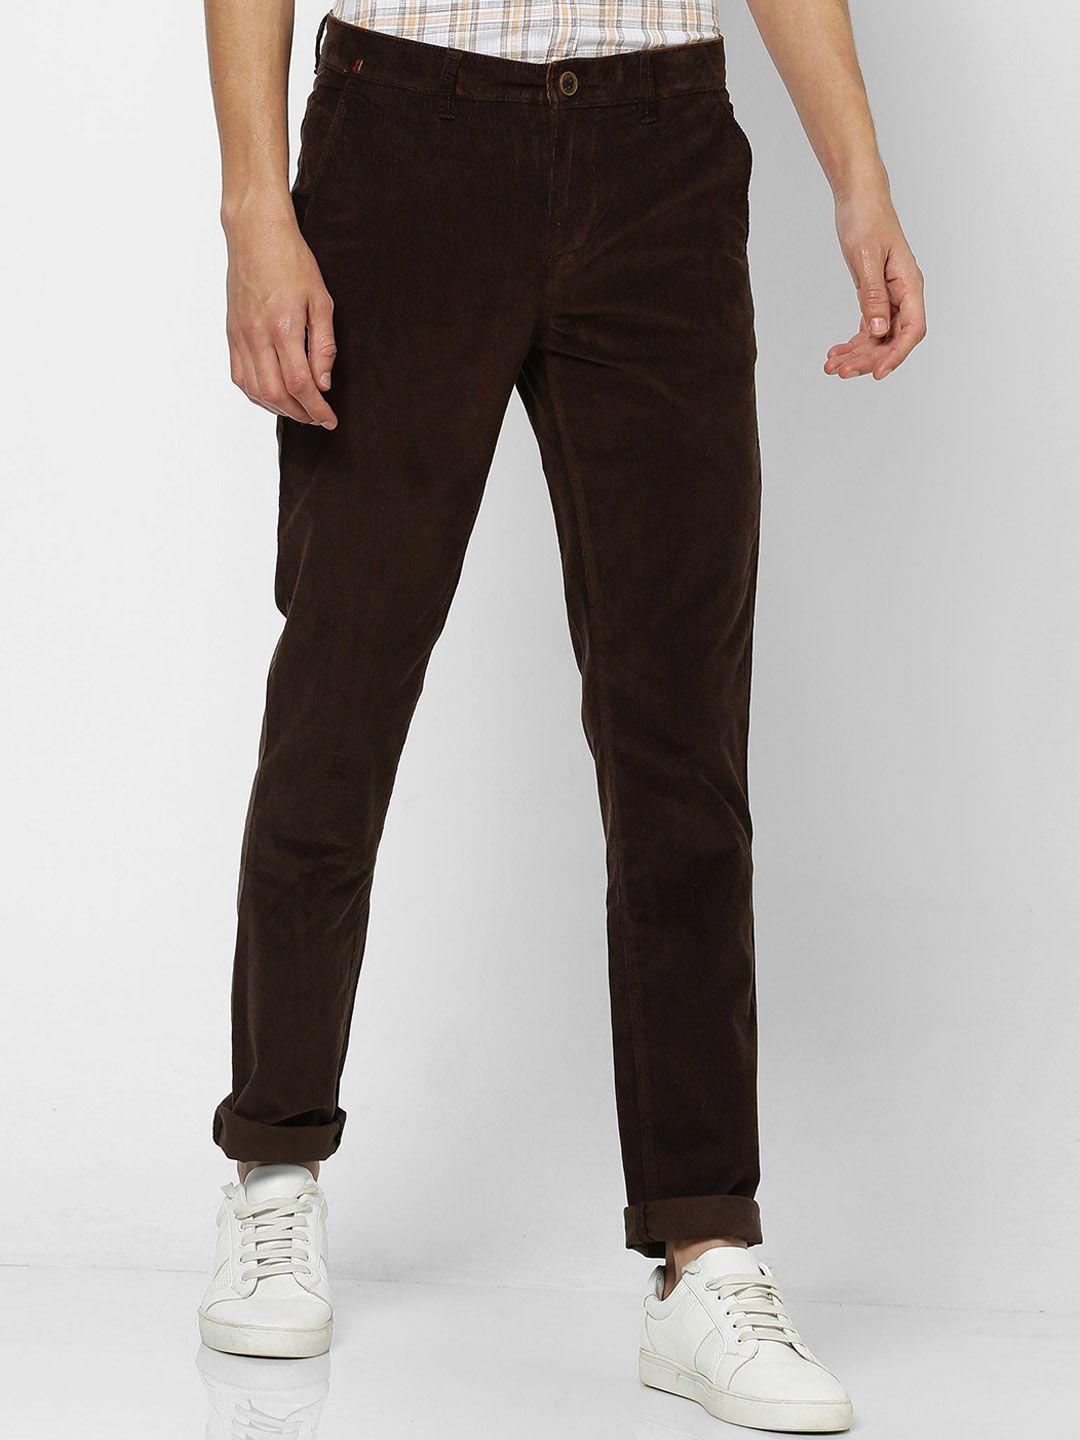 red-flame-men-slim-fit-mid-rise-stretchable-casual-trousers